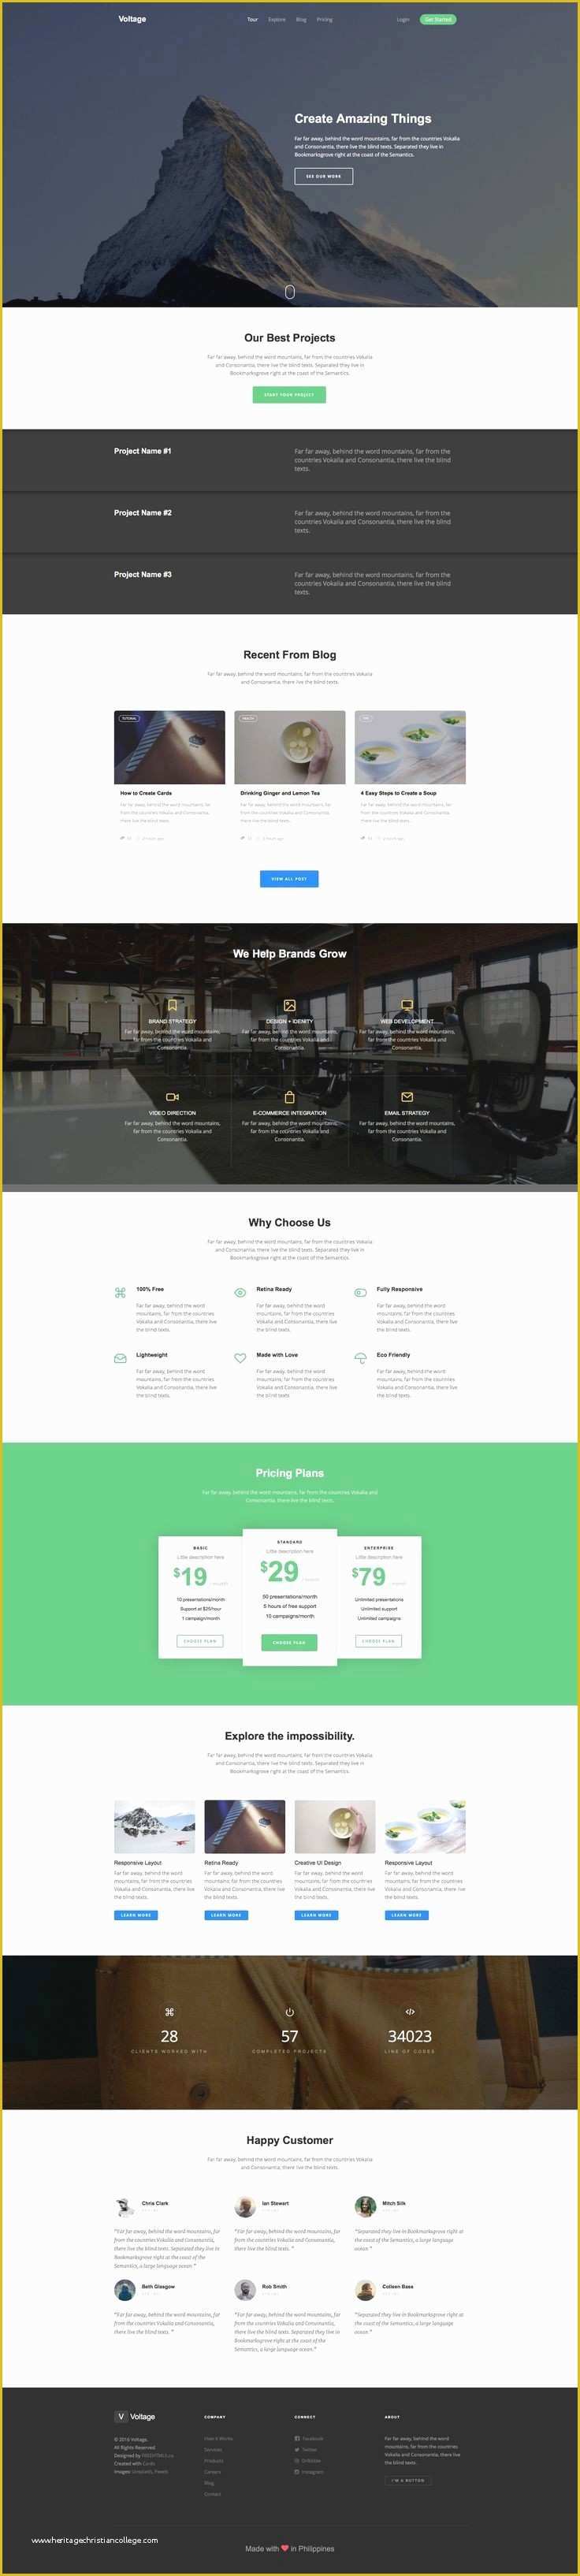 free-website-templates-download-html-and-css-and-javascript-of-responsive-website-templates-free